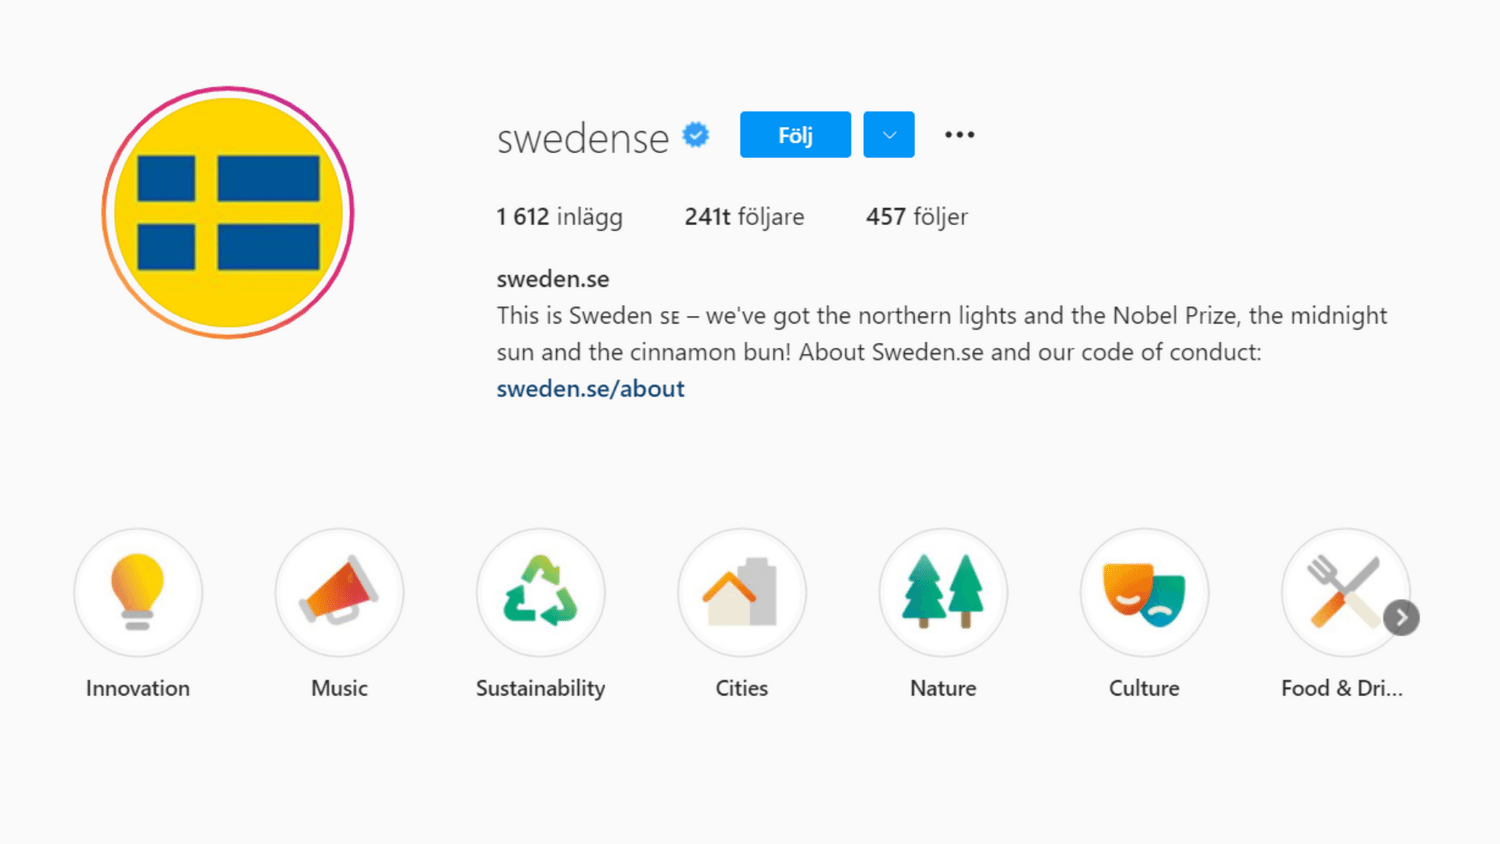 Theme suggestion for pictograms in sweden.se's Instagram profile highlights.